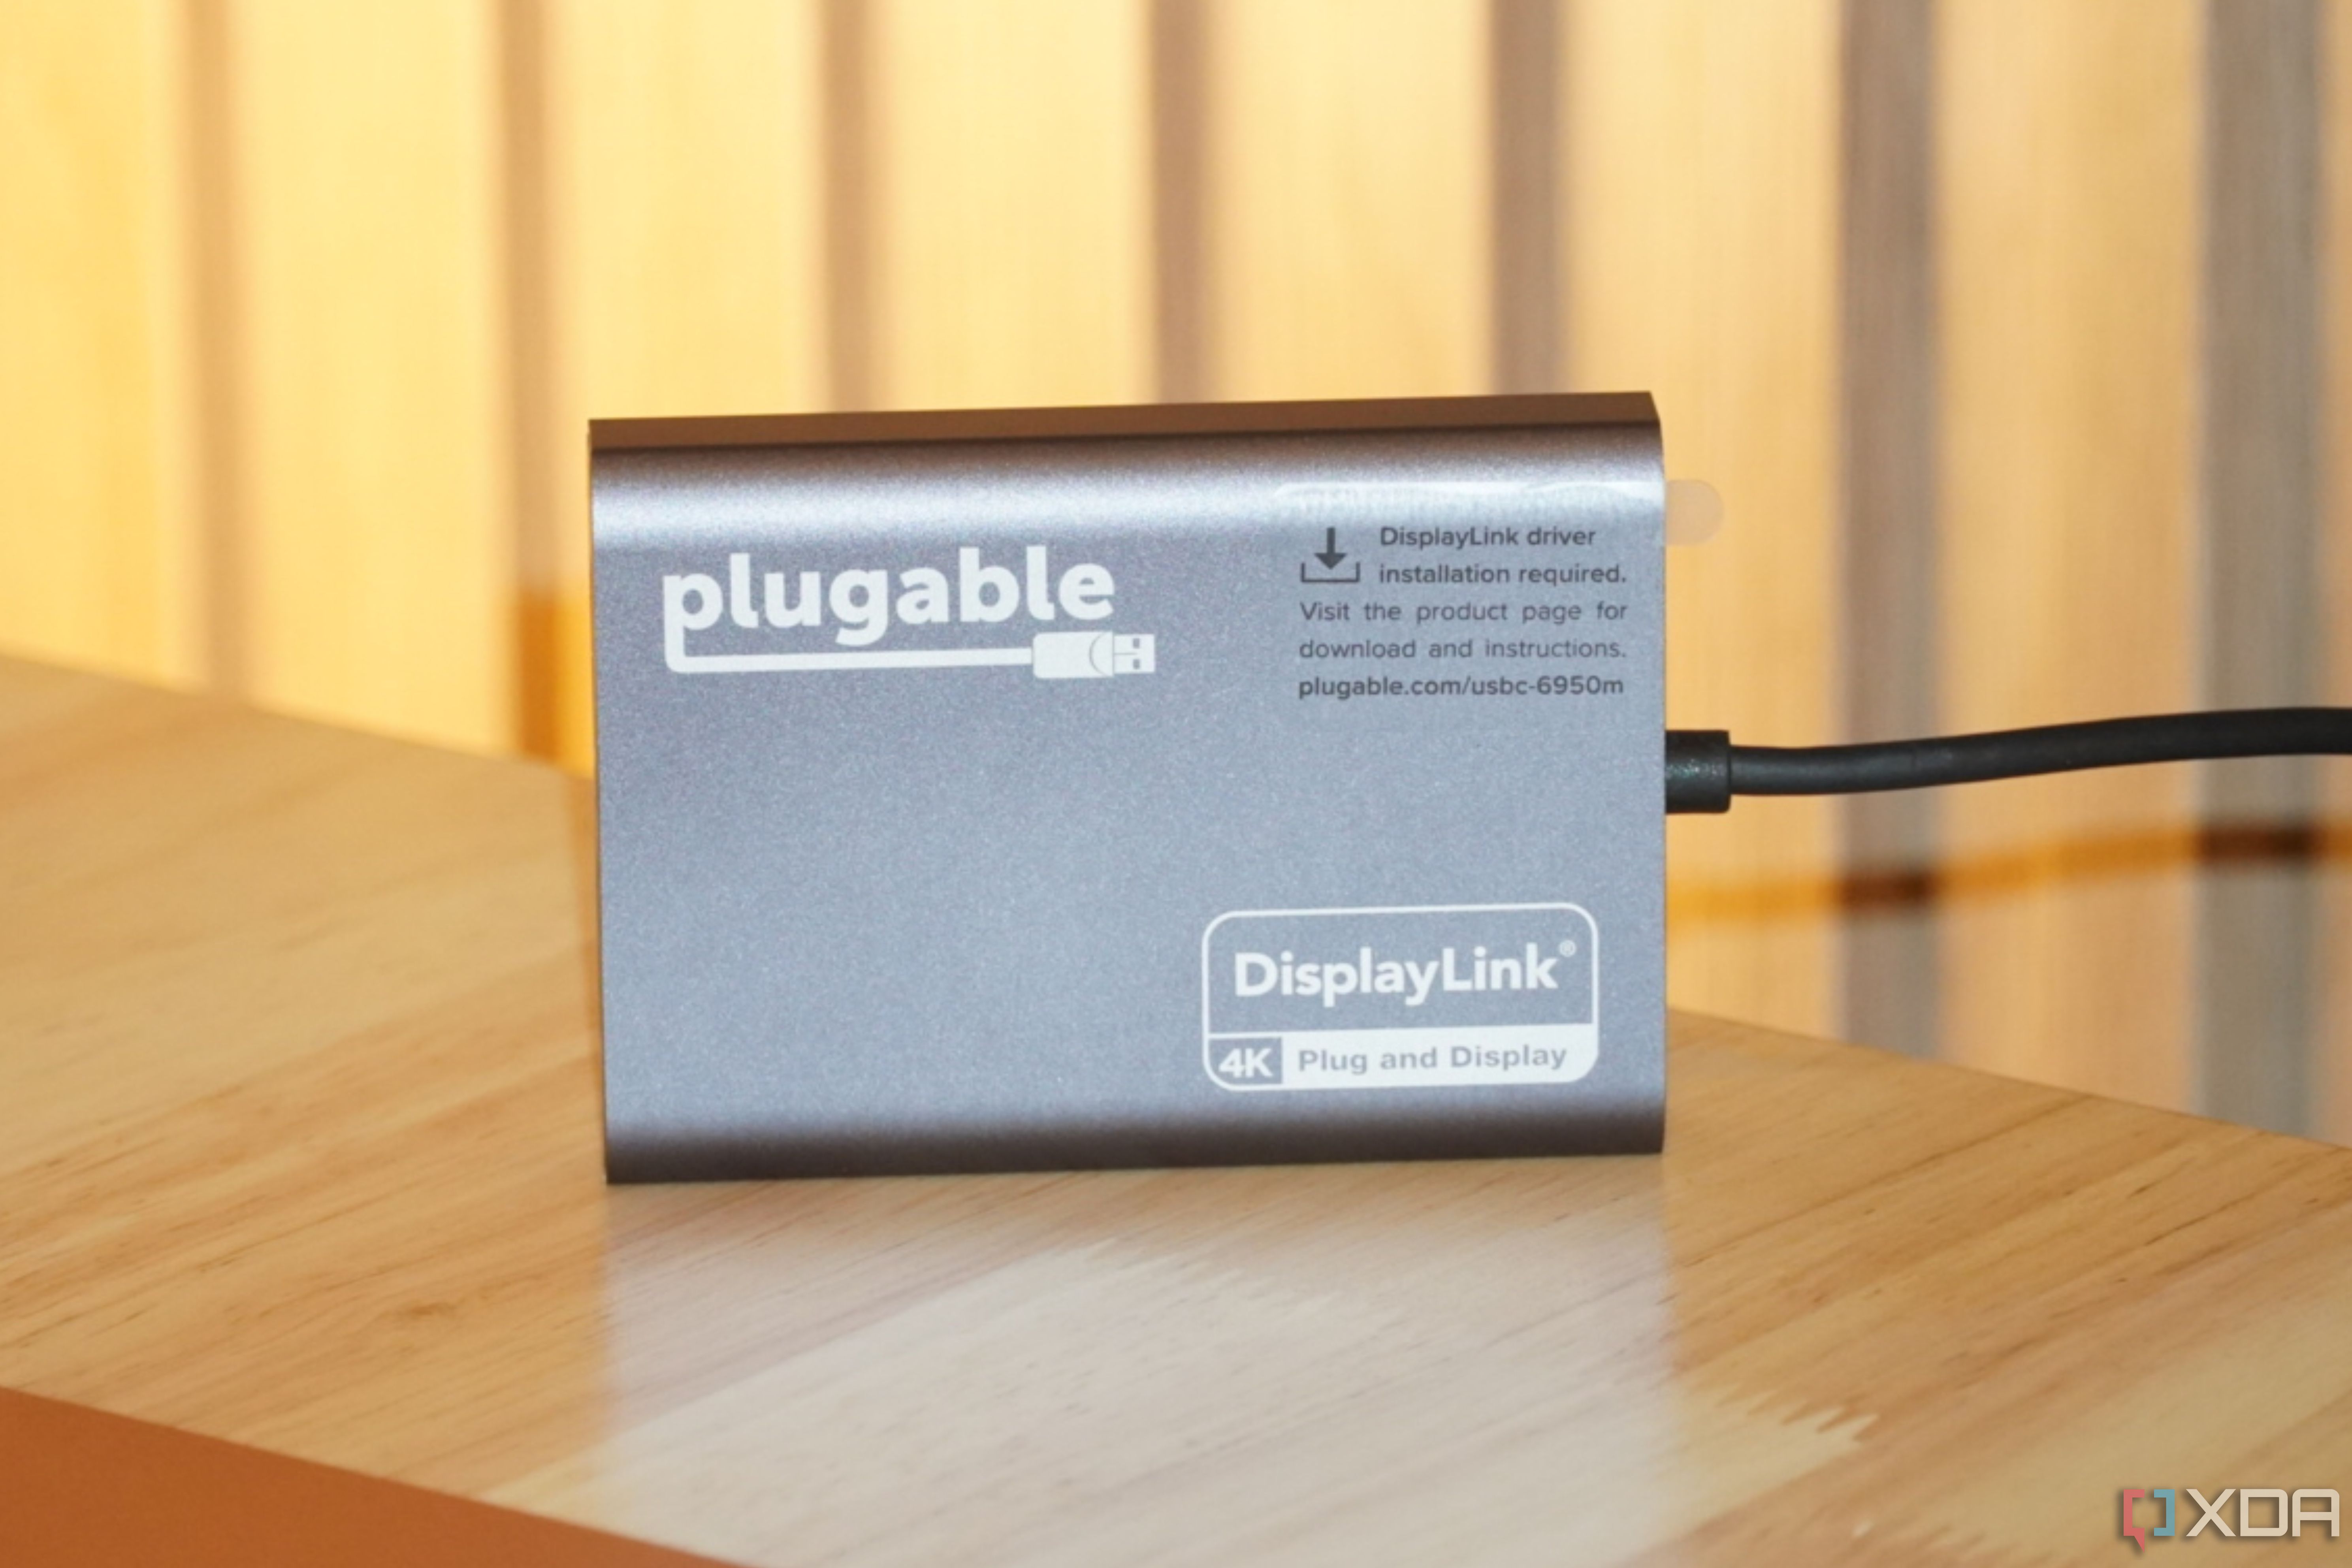 Plugable's adapter on its side.